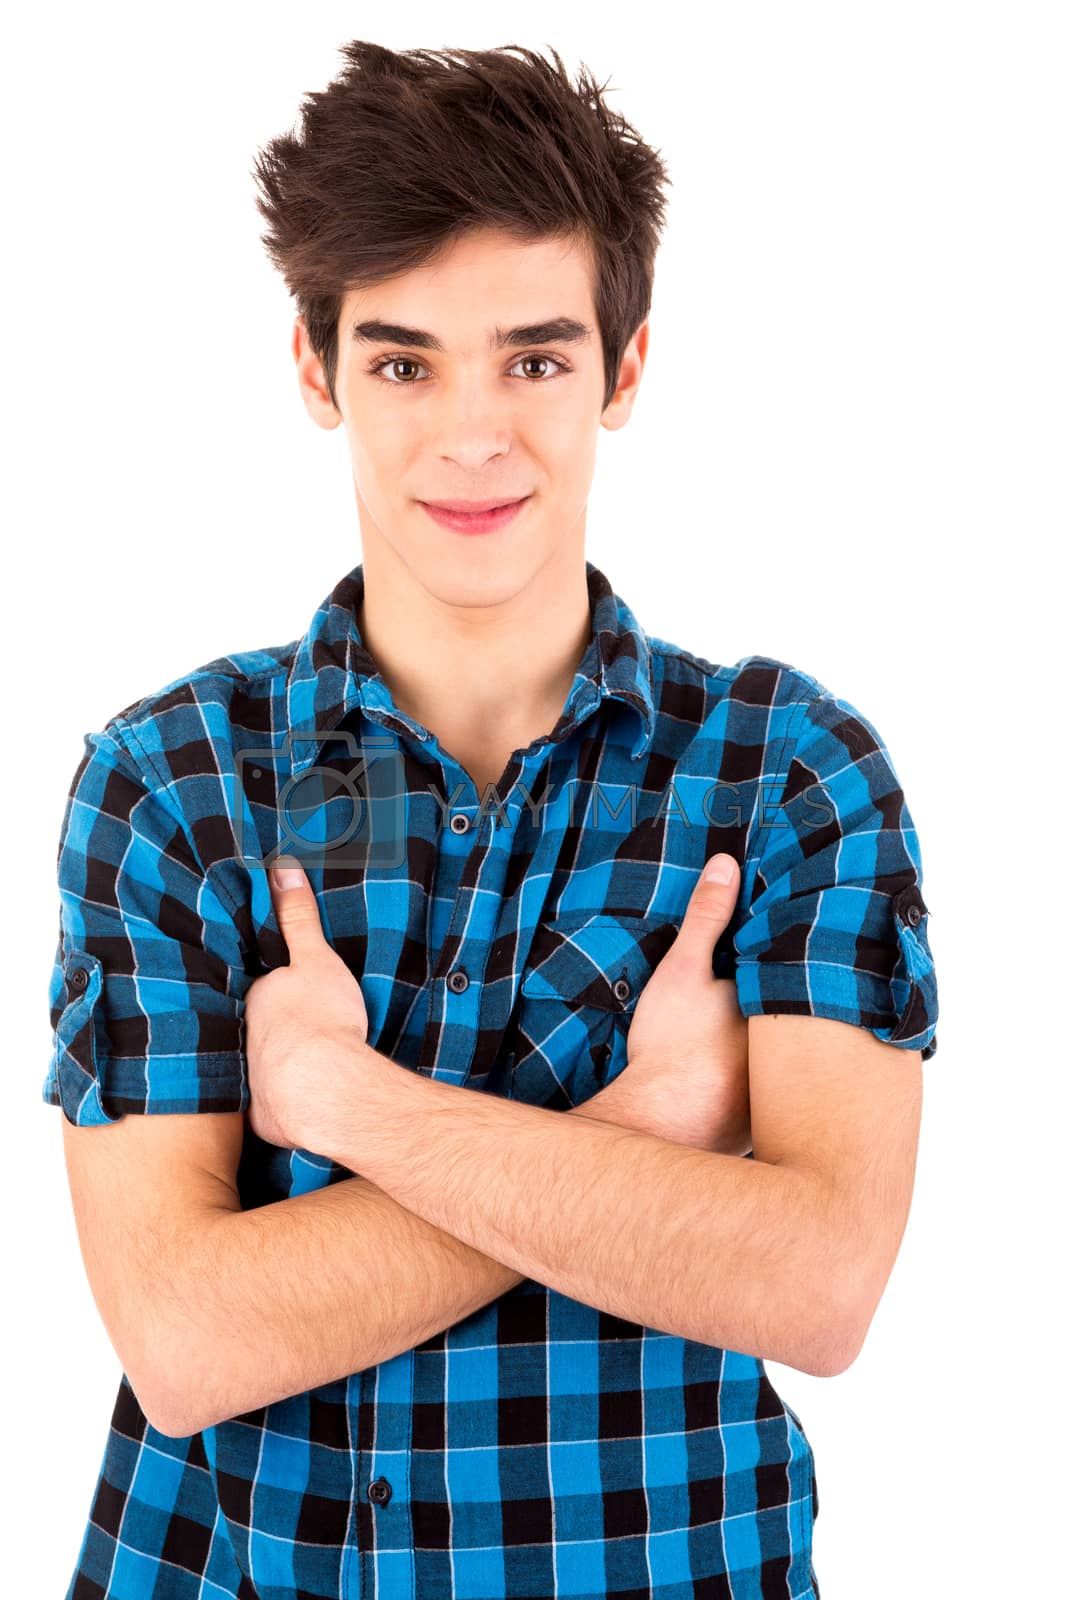 Royalty free image of Studio picture of a young and handsome man posing  by jolopes